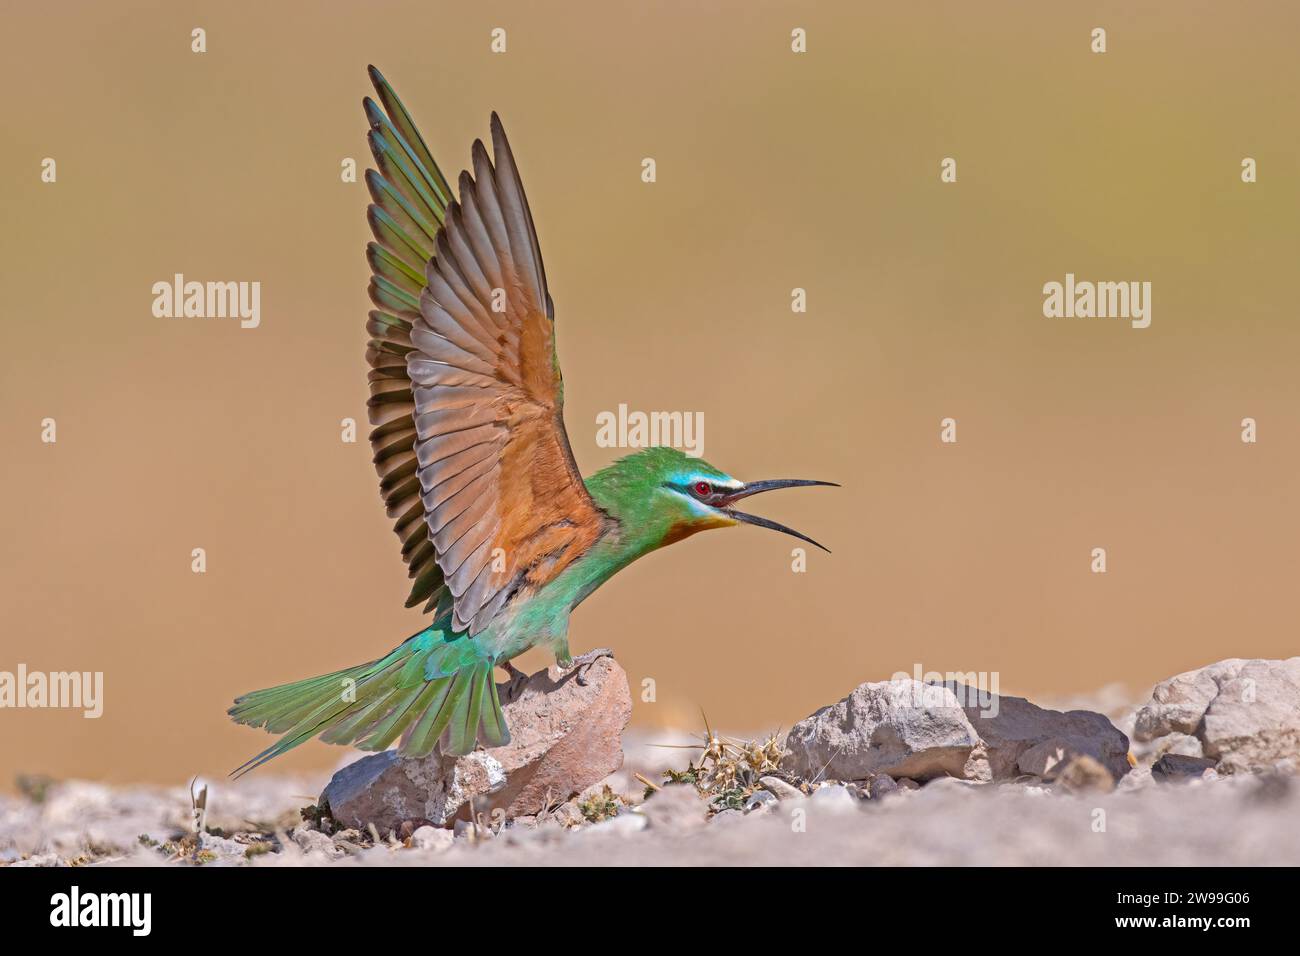 Blue-cheeked Bee-eater, Merops persicus with wings open. Stock Photo